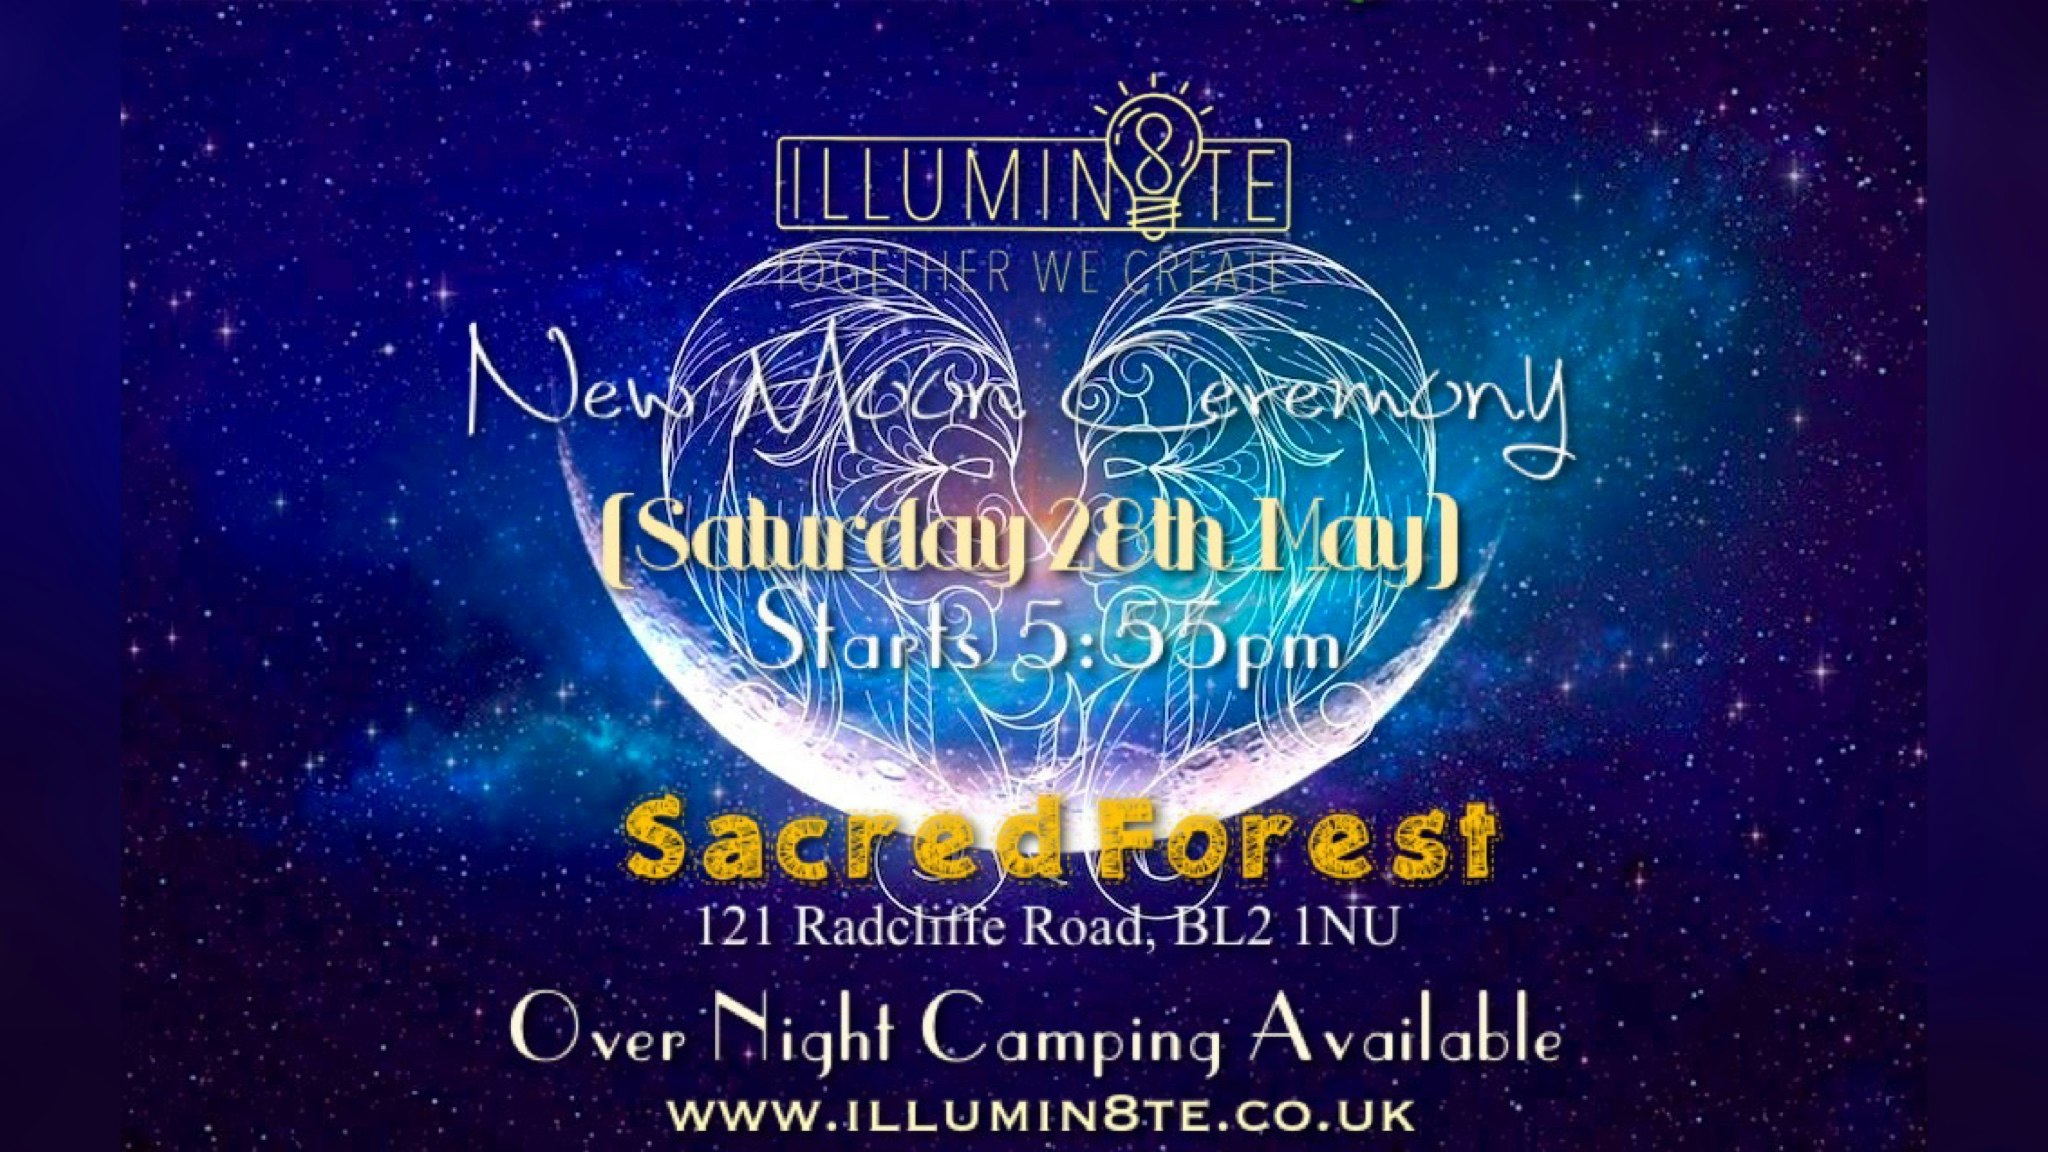 Illumin8te | New Moon Ceremony (Saturday 28th May) @ The Sacred Forest